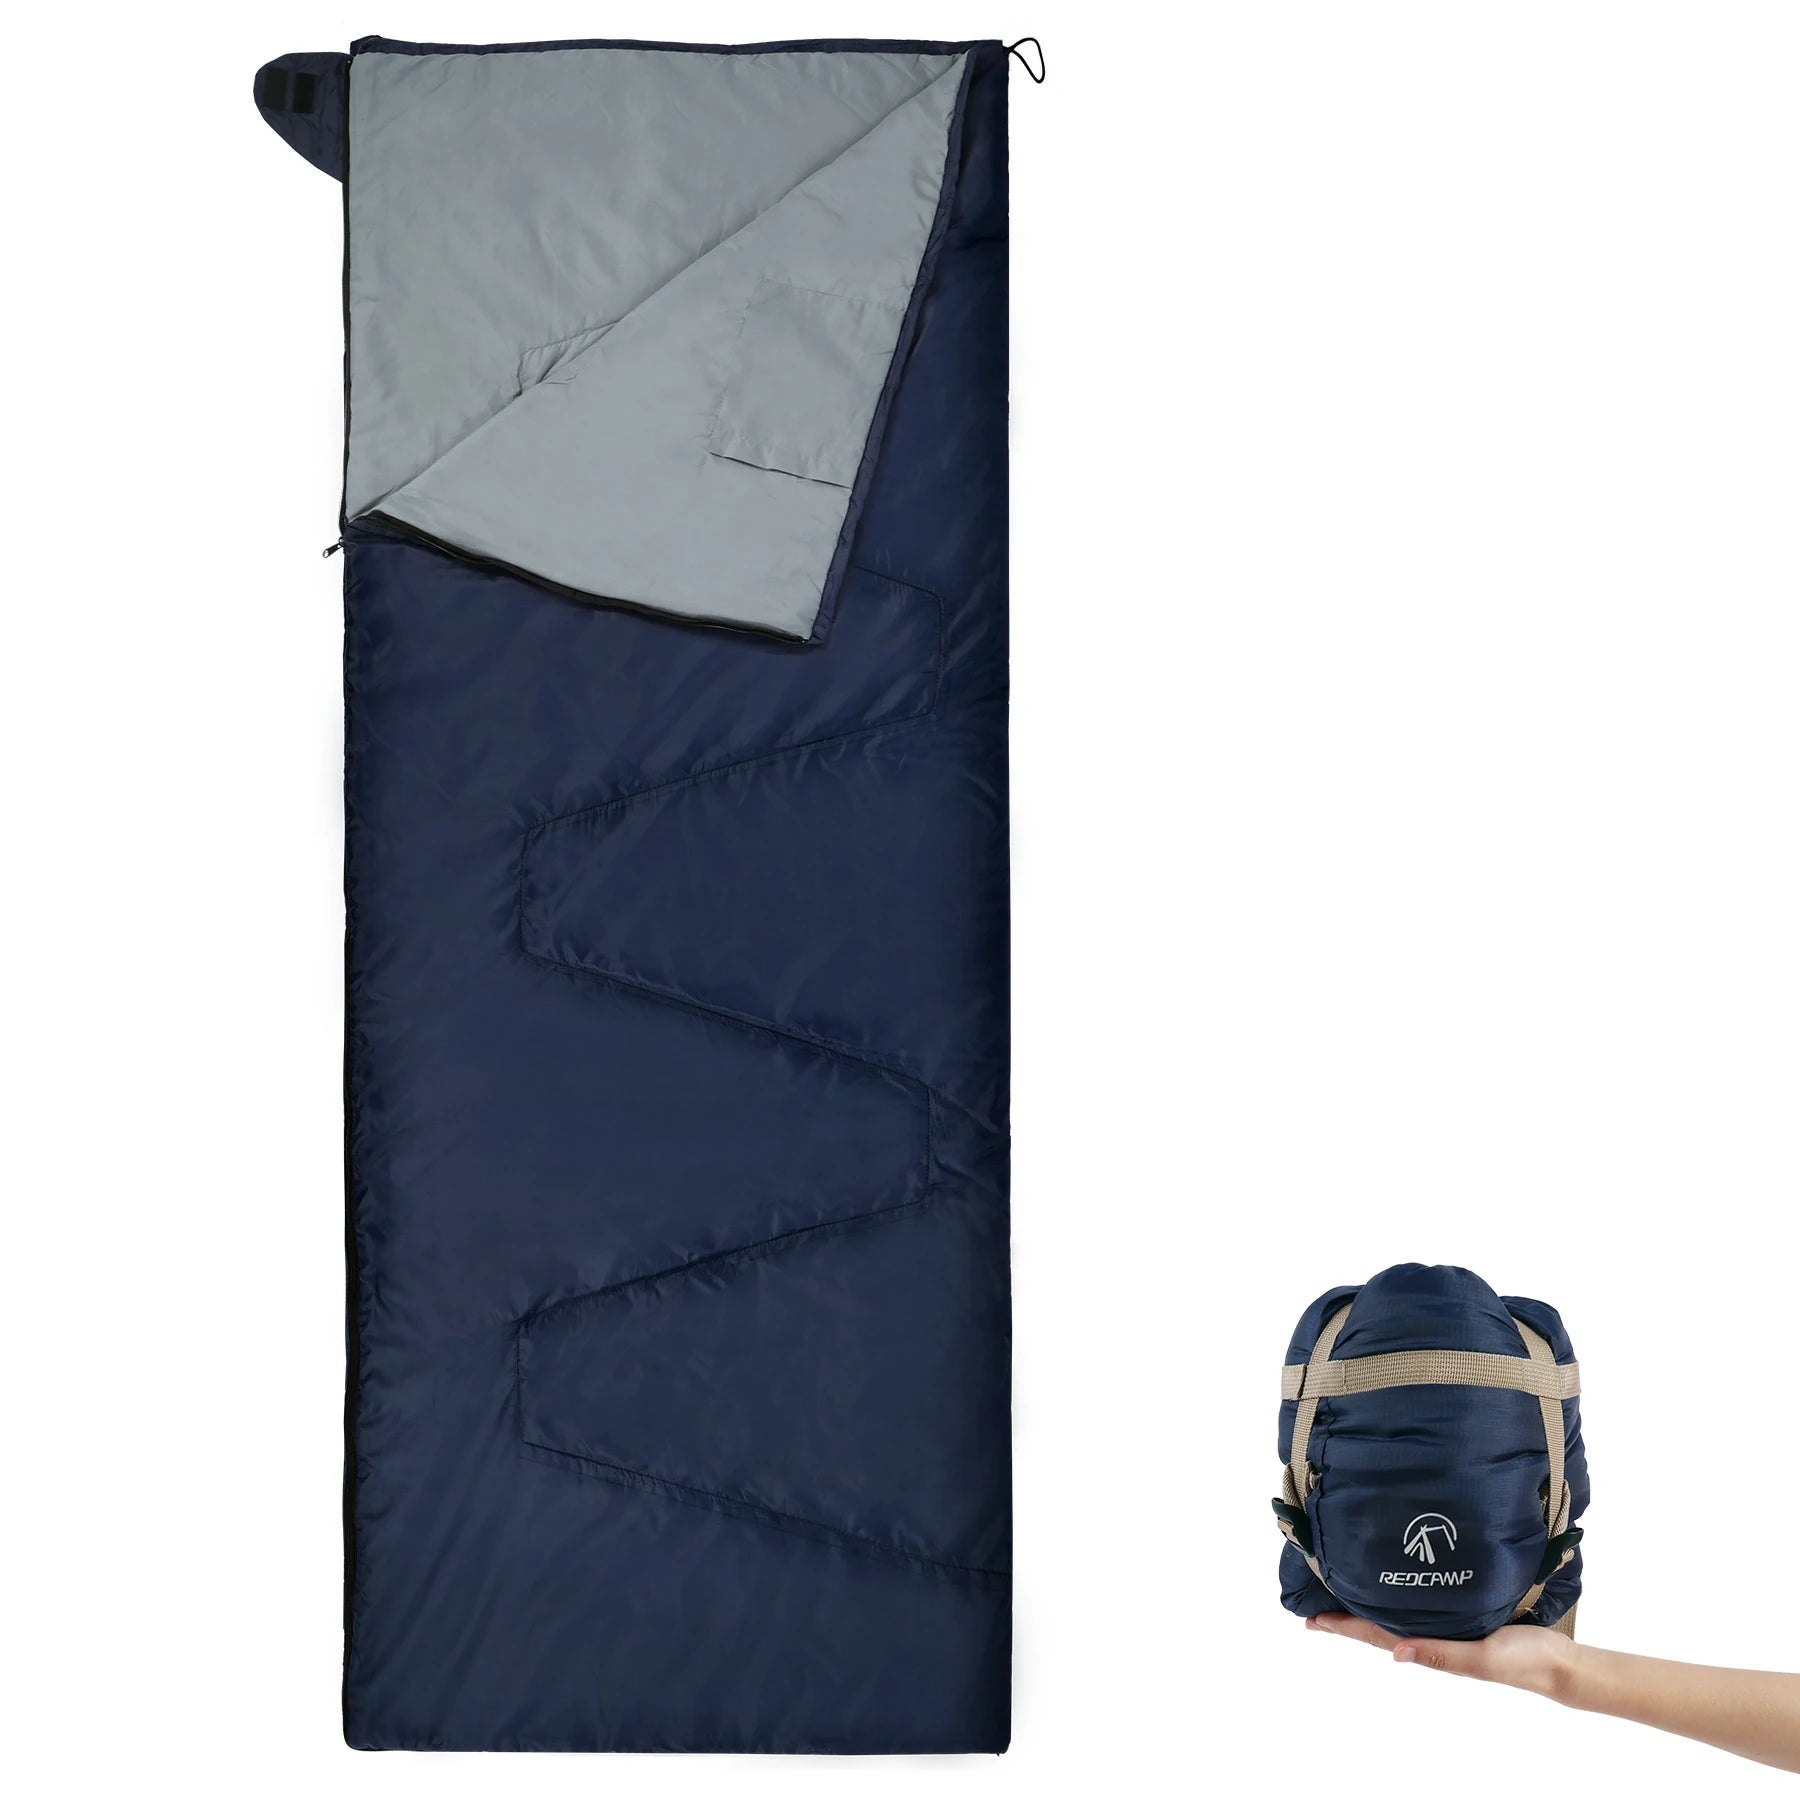 Ultralight Camping Sleeping Bag for Warm Weather,Green Blue Black Navy Blue